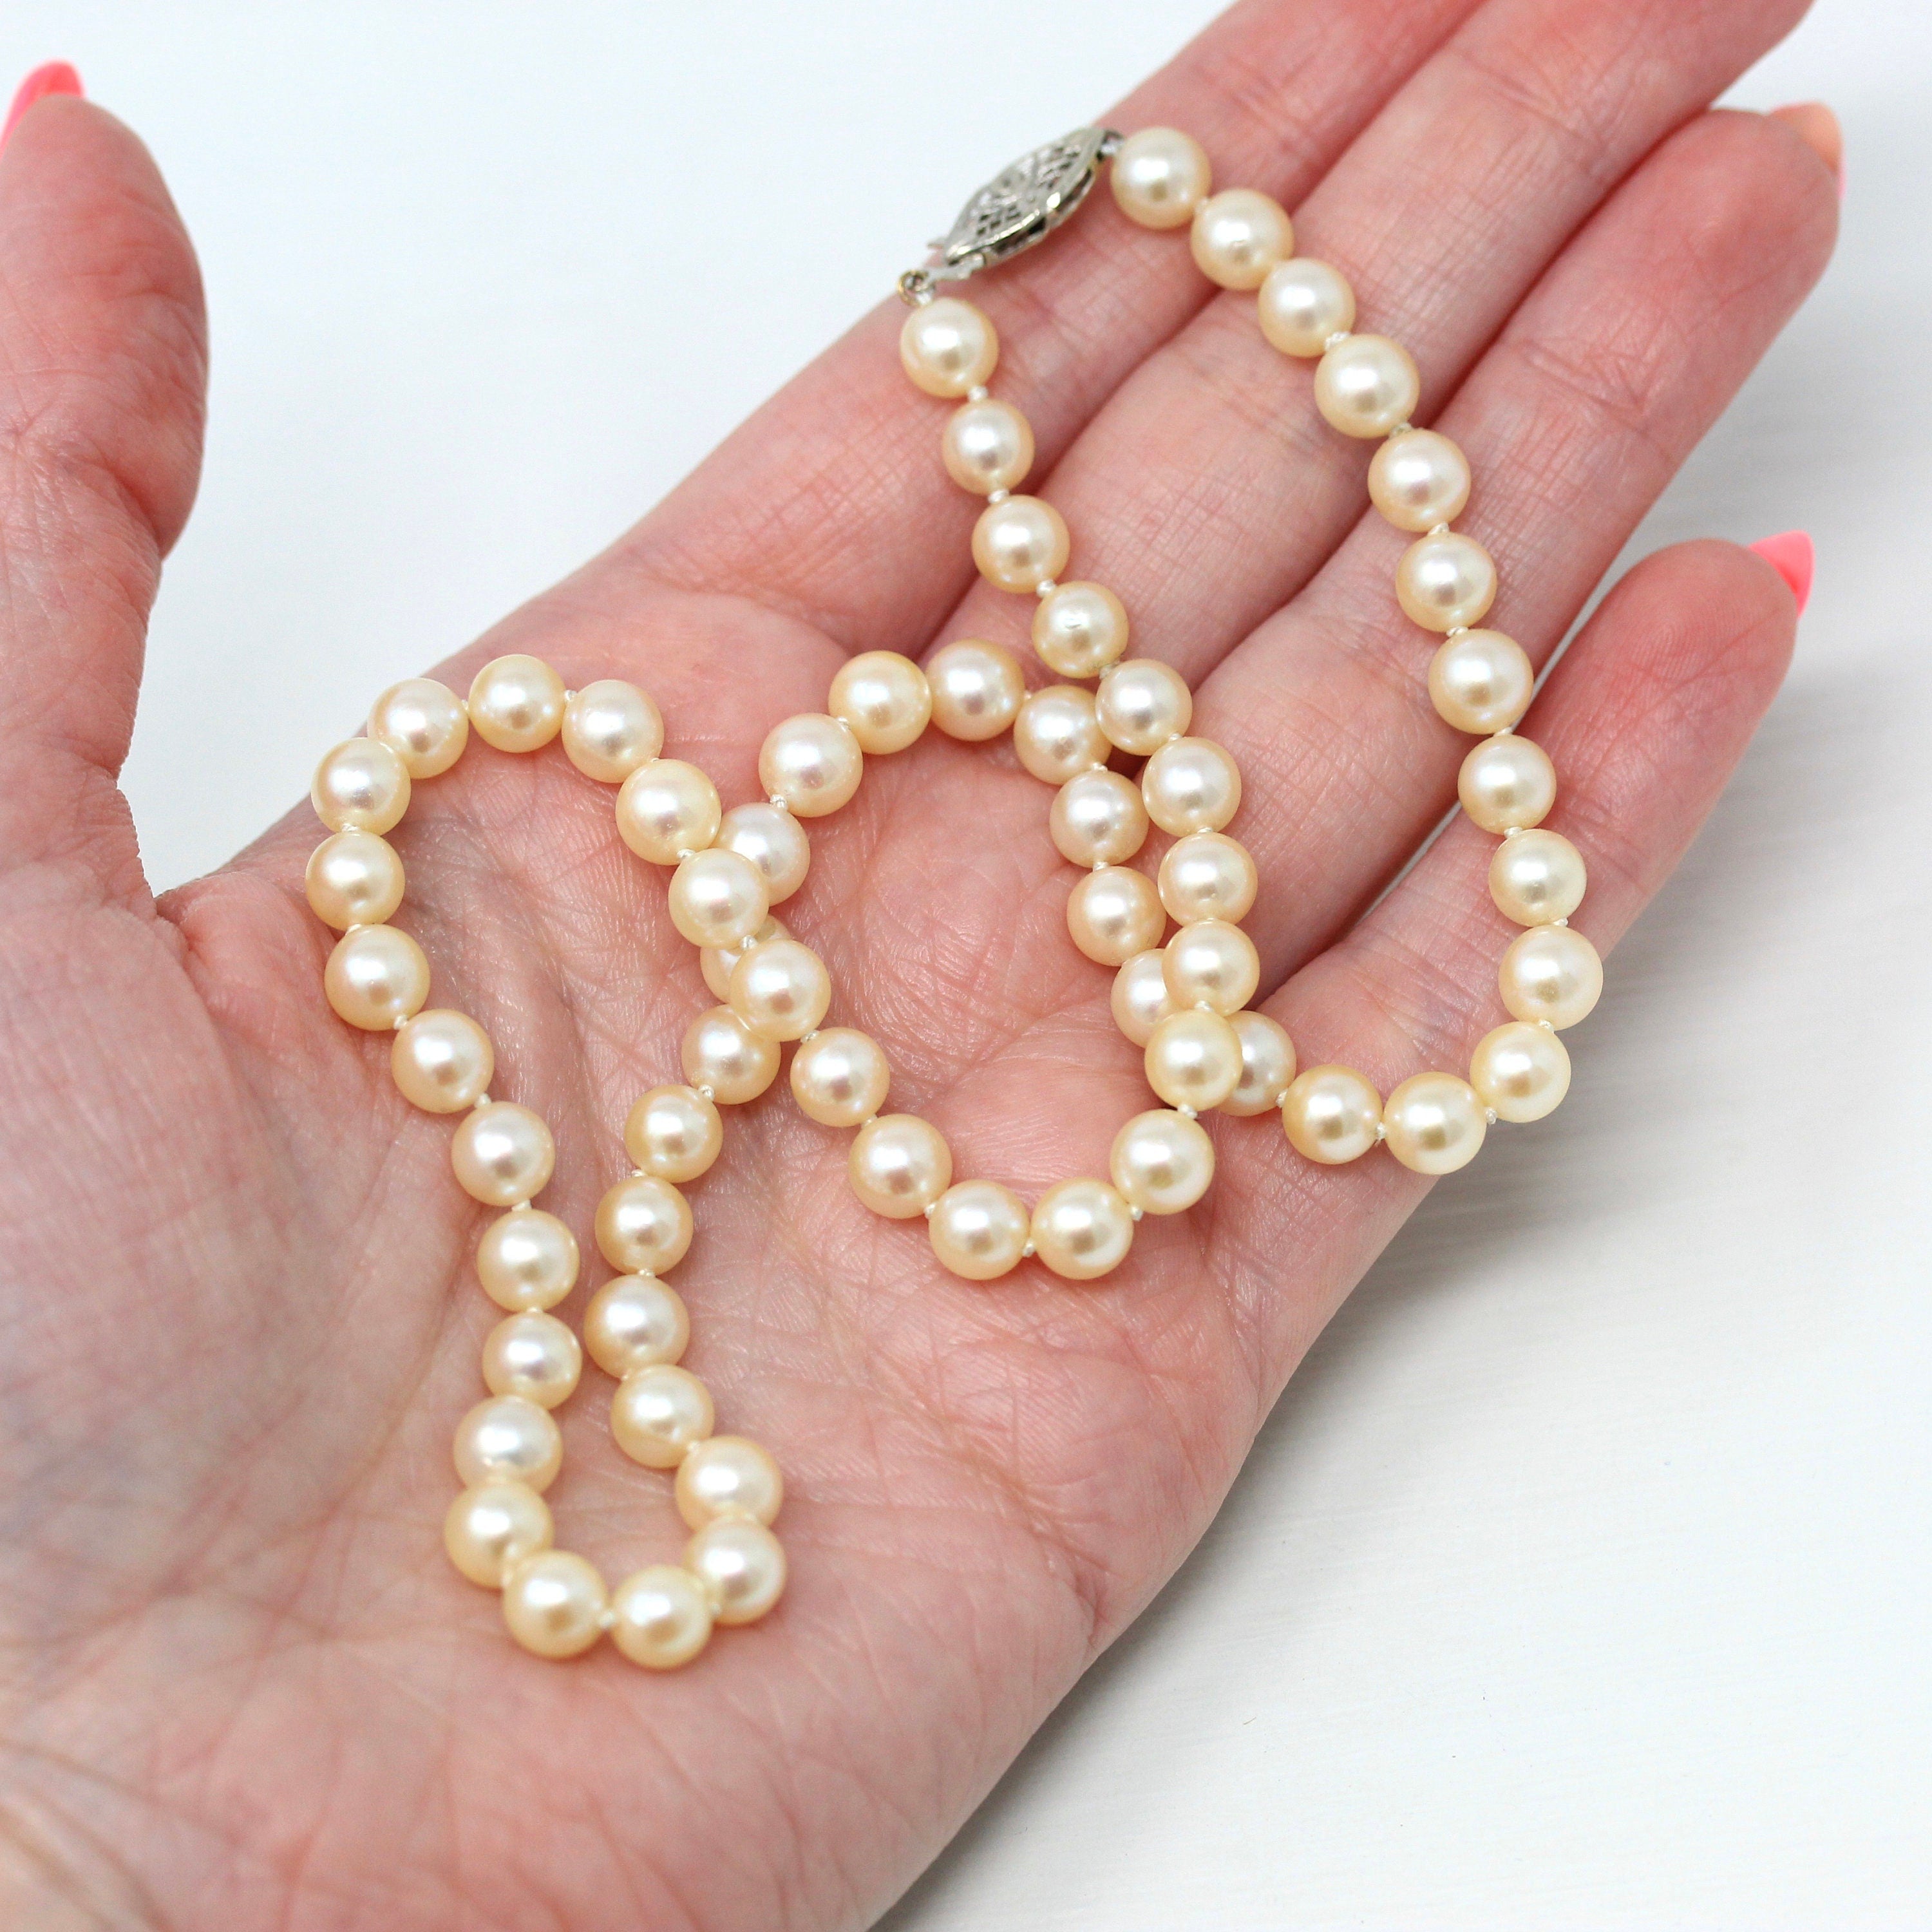 12-14mm Golden South Sea Pearl Necklace - AAA Quality - Pure Pearls